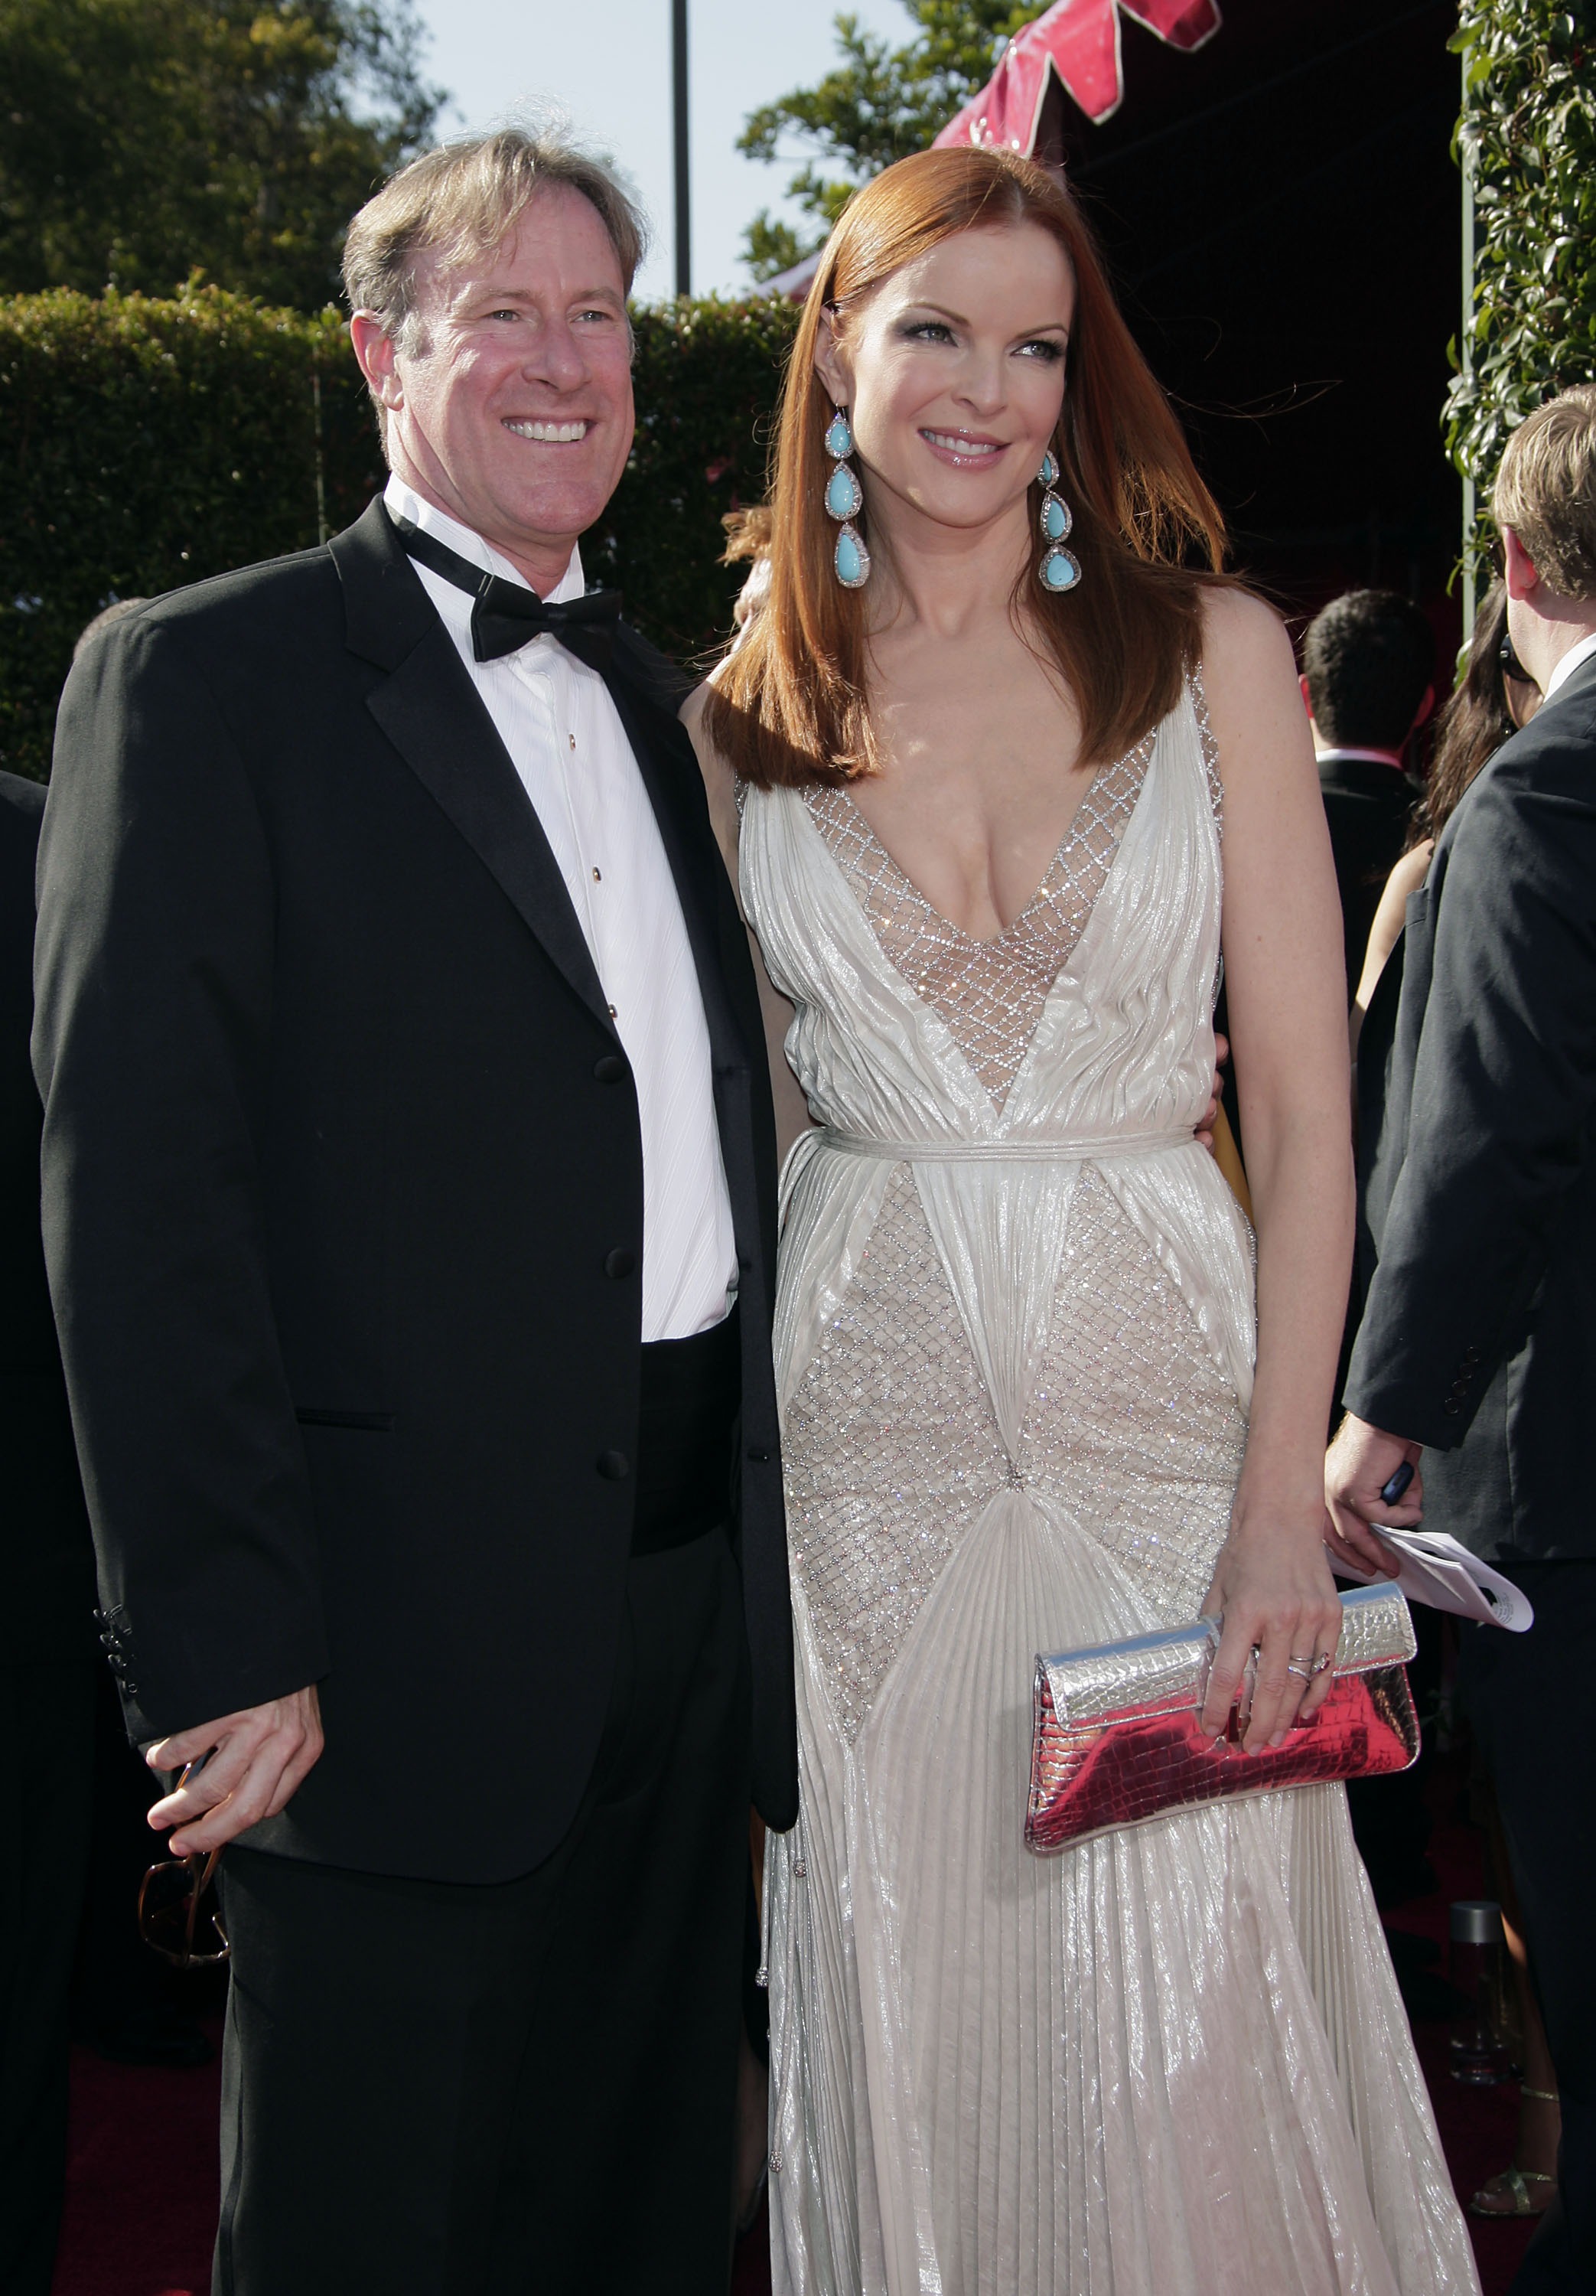 Marcia Cross and Tom Mahoney at the 59th Annual Primetime Emmy Awards on September 16, 2007 in Los Angeles, California. | Source: Getty Images